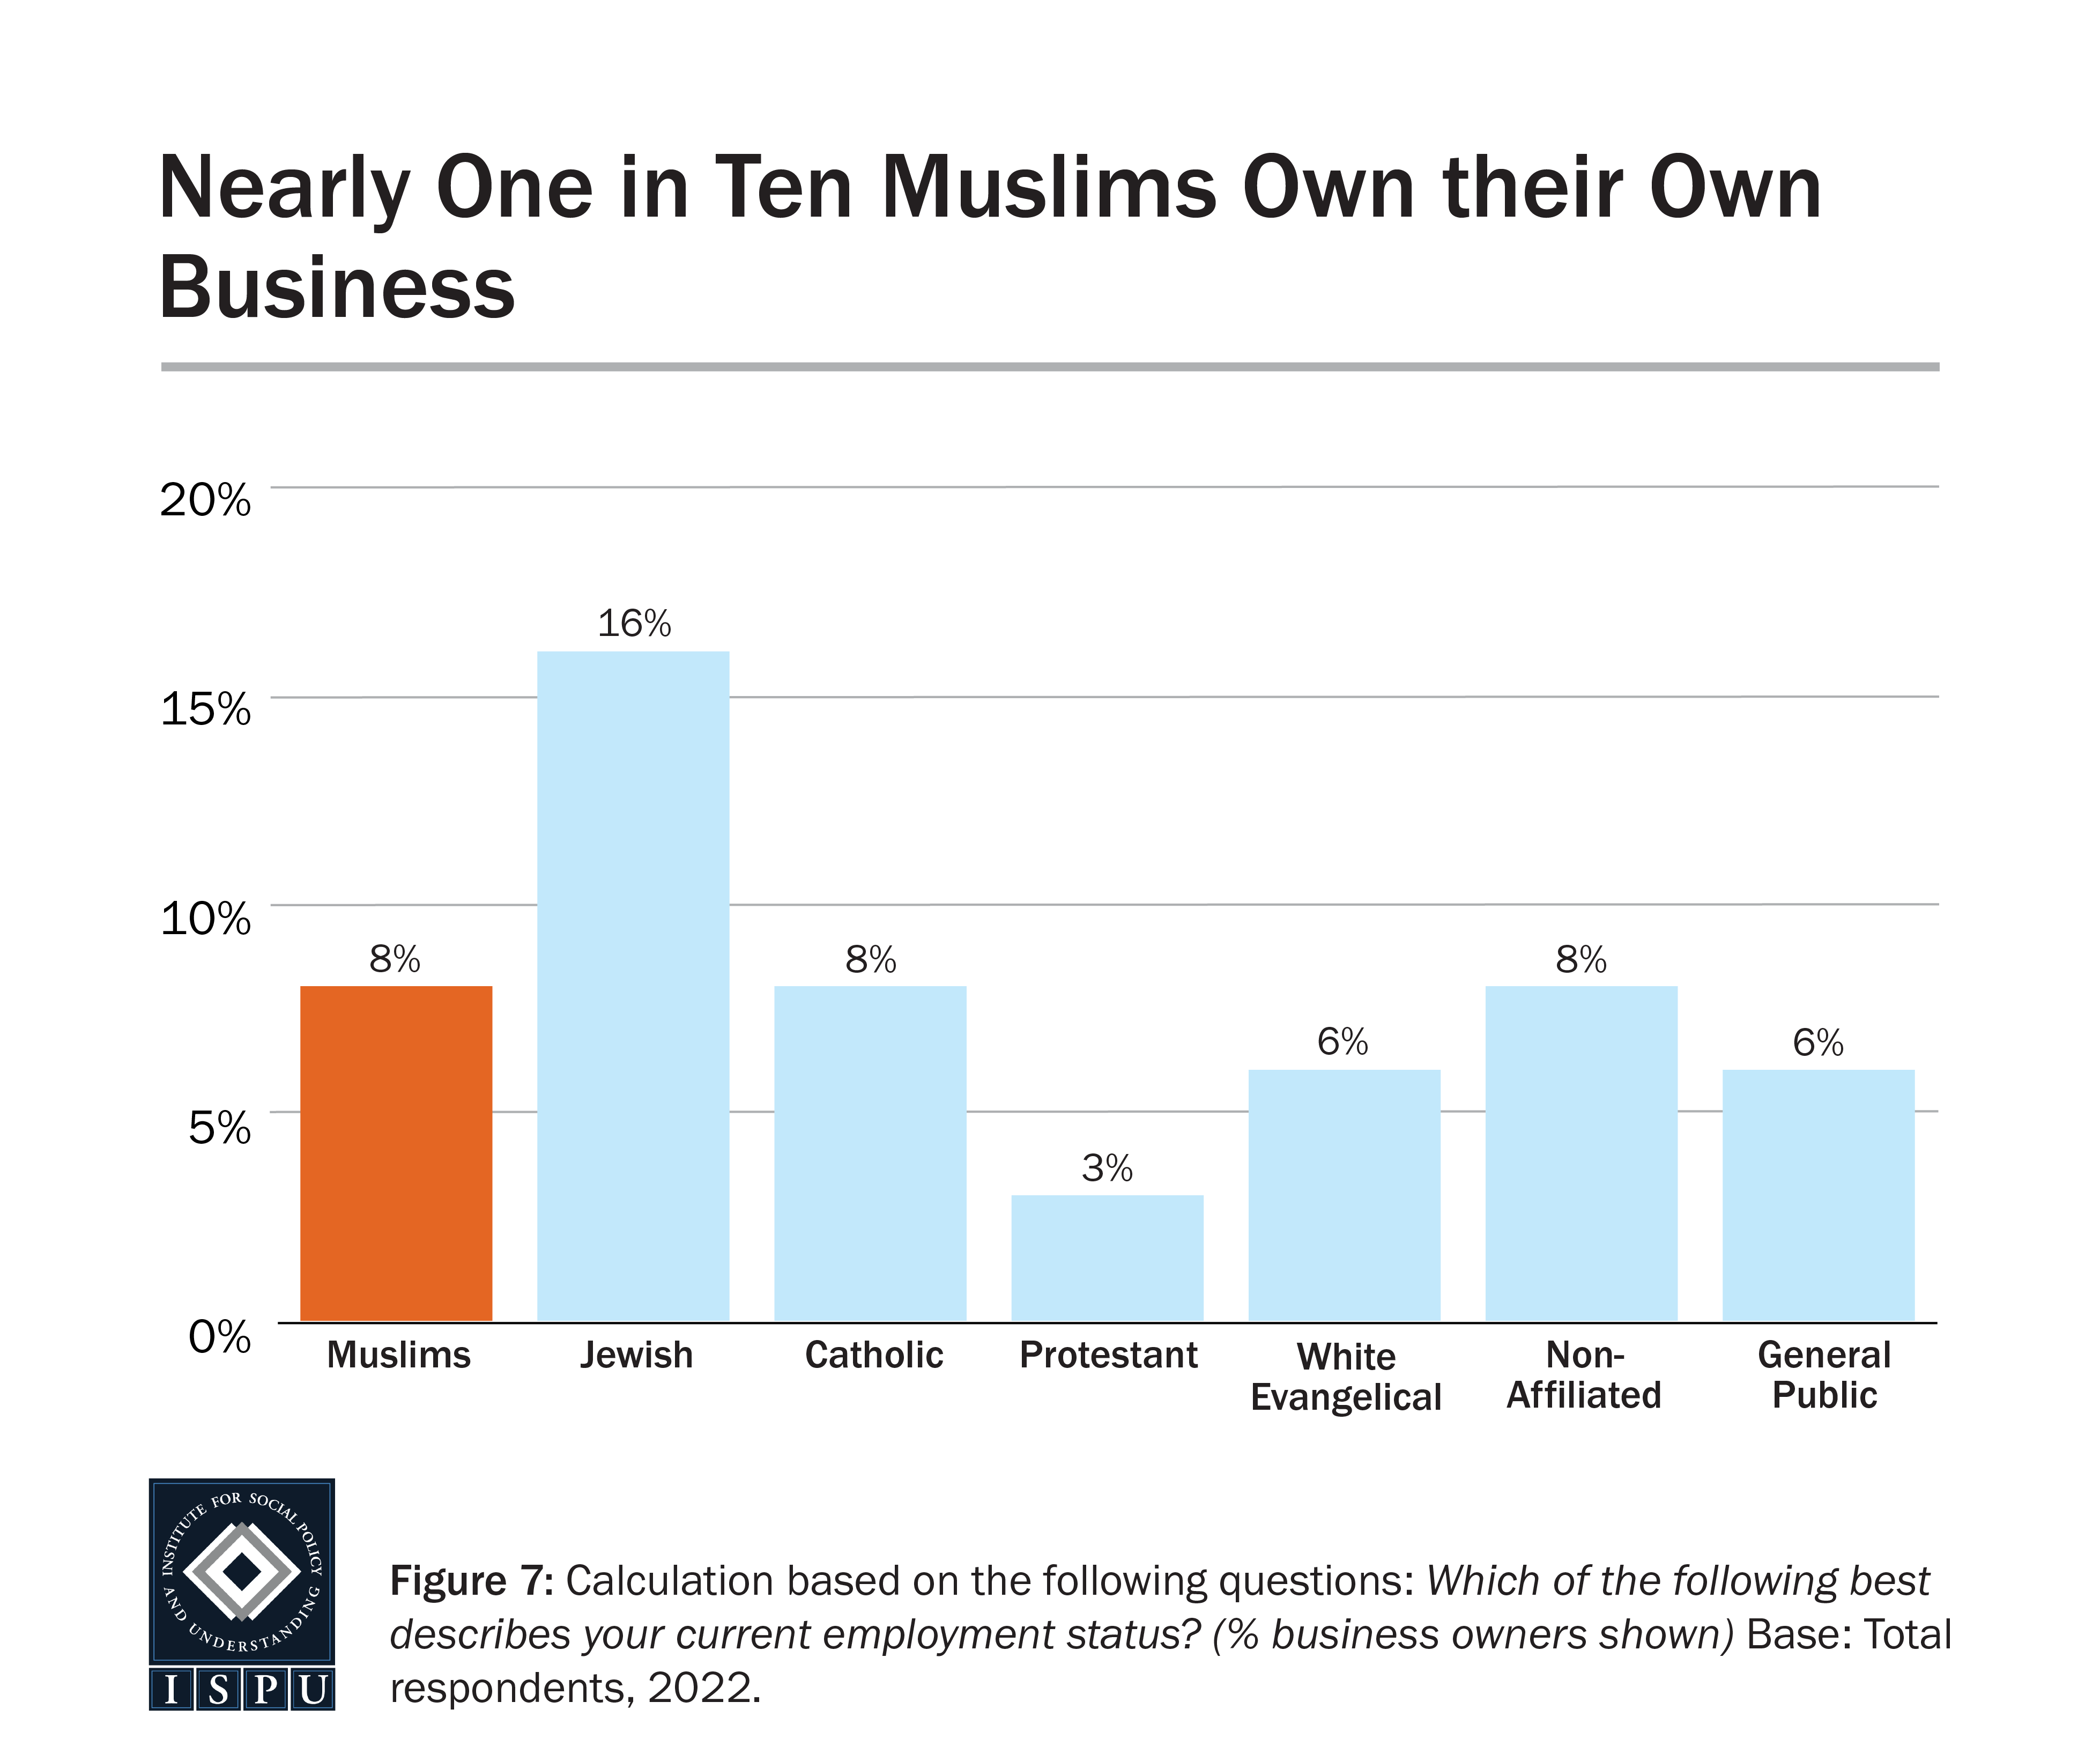 A bar graph showing the proportion of each group that owns their own business